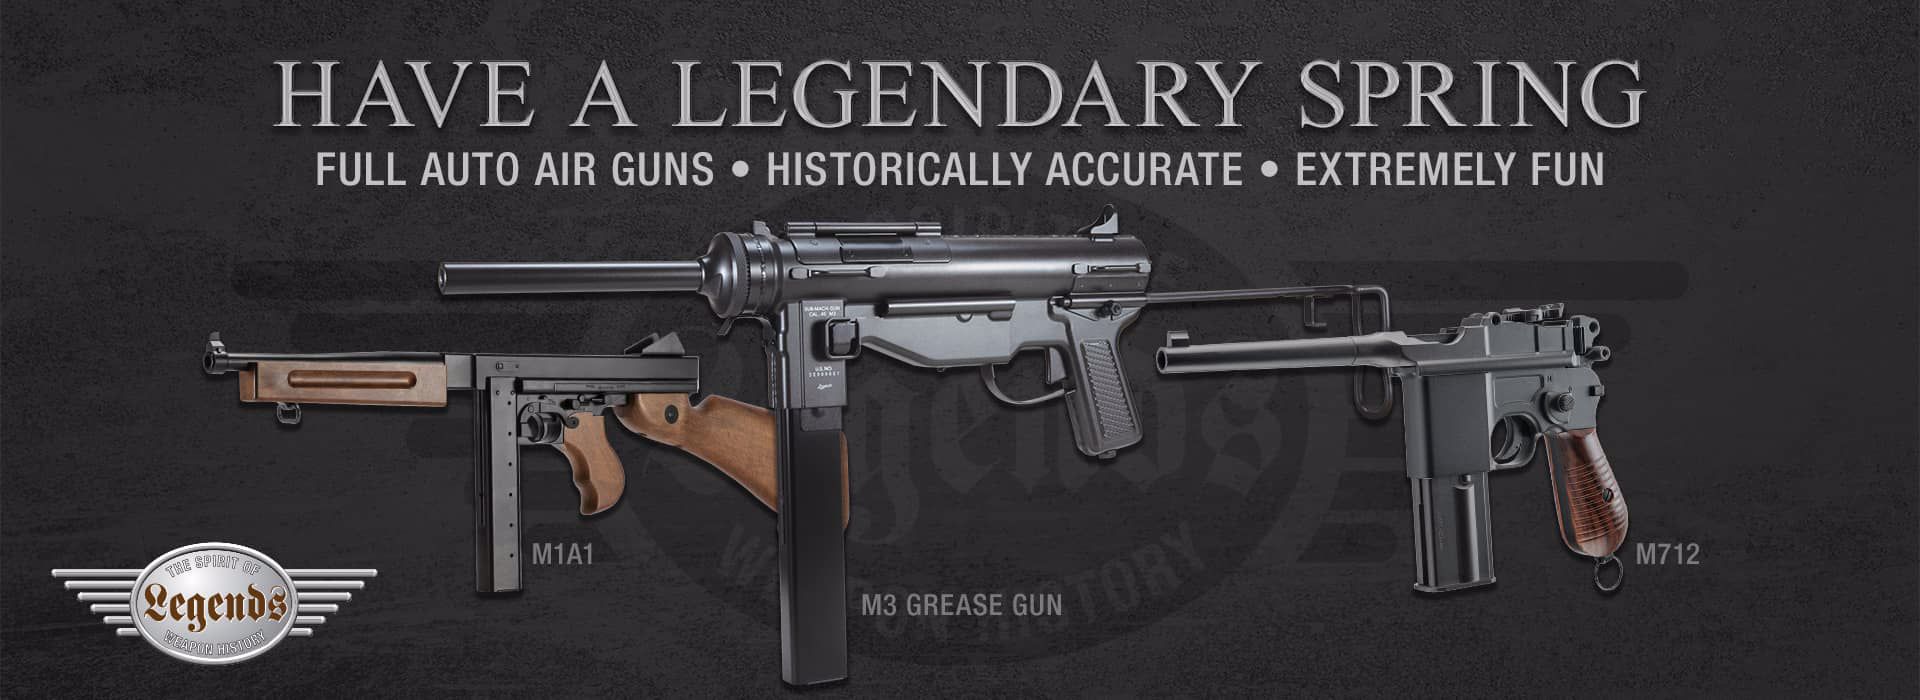 Have a Legendary Spring! Full Auto Air Guns. Historically Accurate. Extemely Fun.